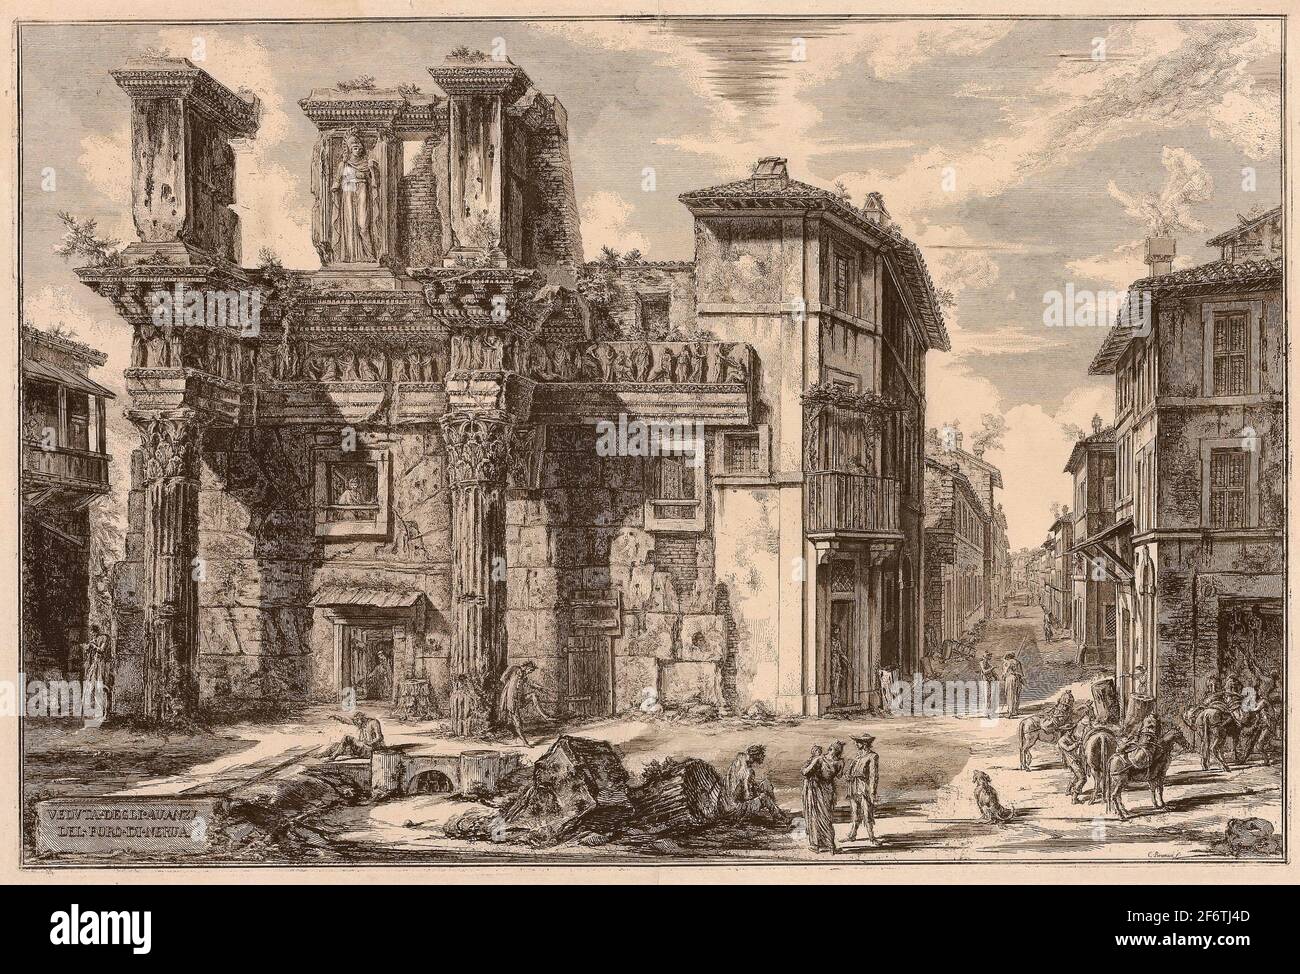 Author: Giovanni Battista Piranesi. View of the Remains of the Forum of Nerva, from Views of Rome - 1770 - Giovanni Battista Piranesi Italian, Stock Photo